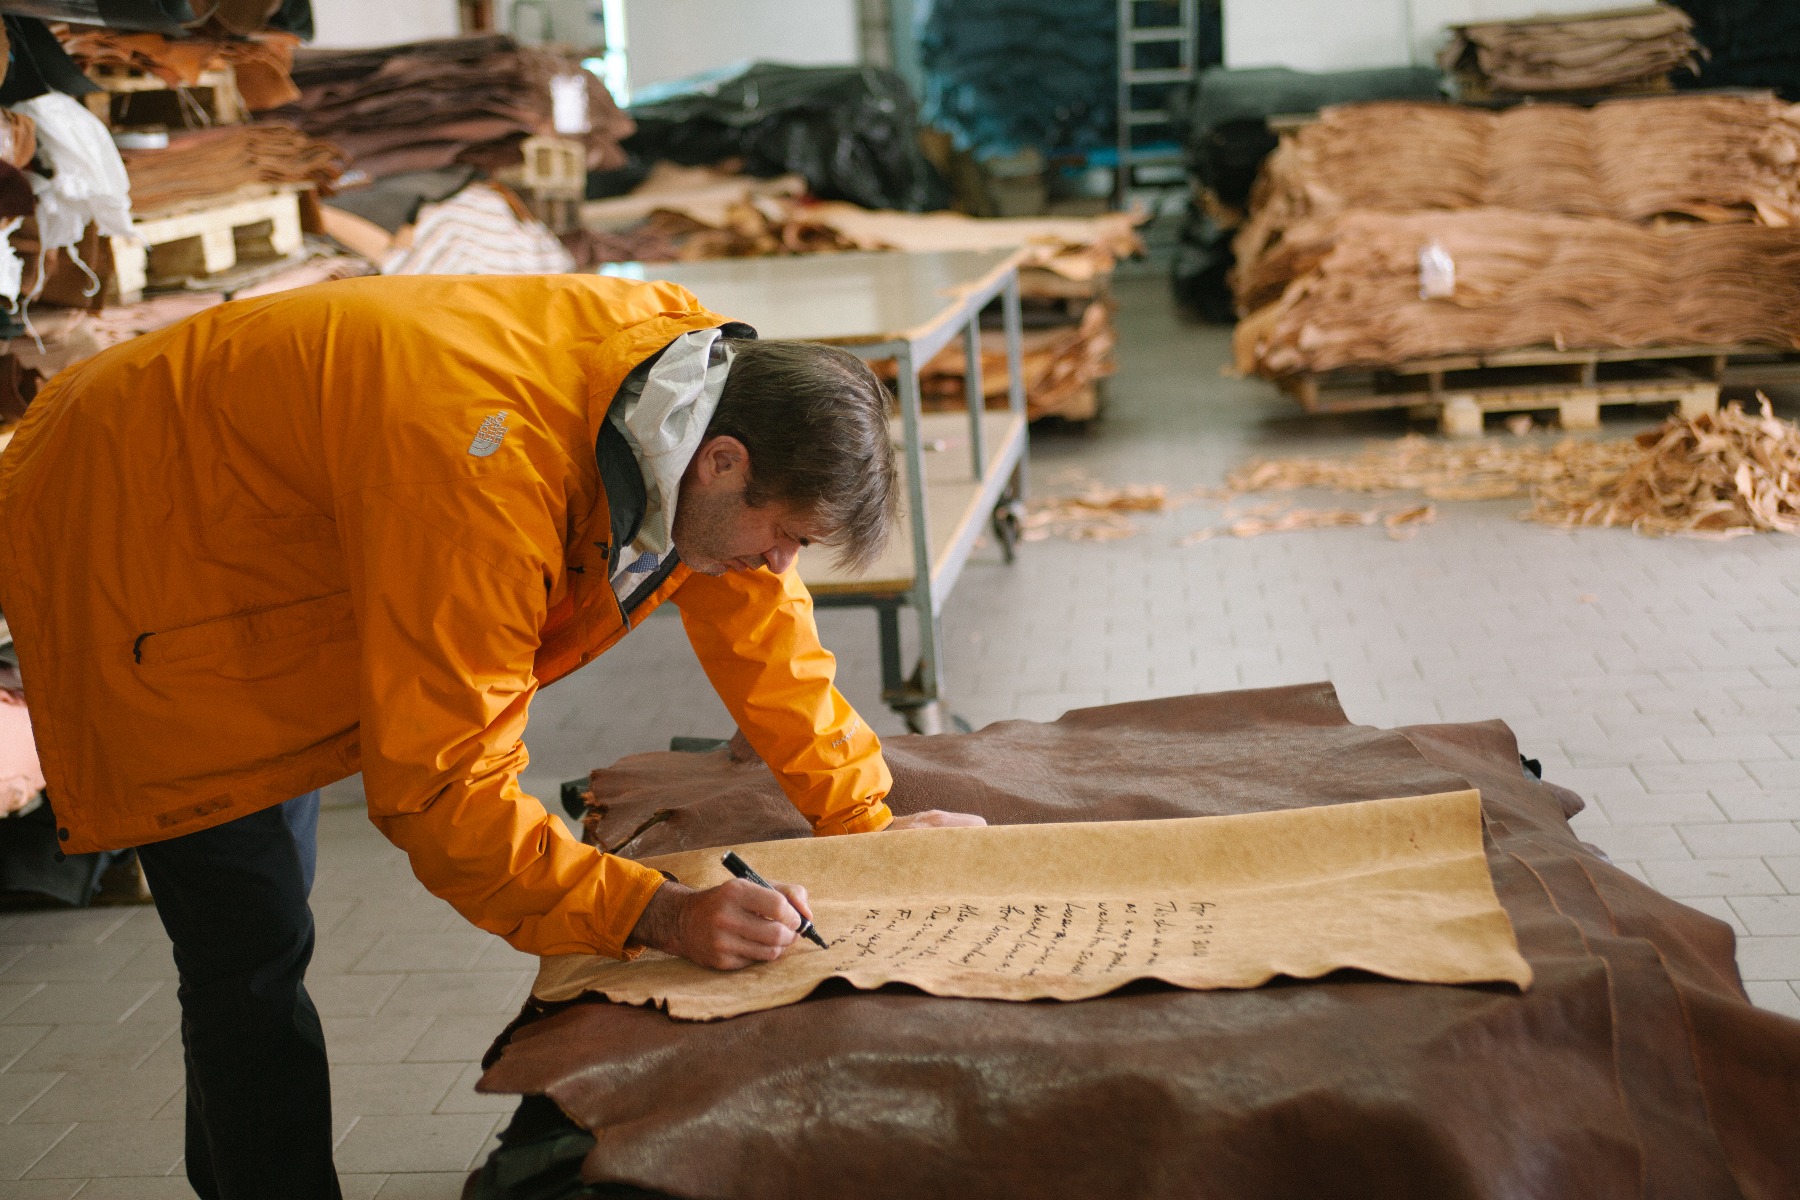 Every foot of our leather is inspected by the owner assuring consistently top-quality product.